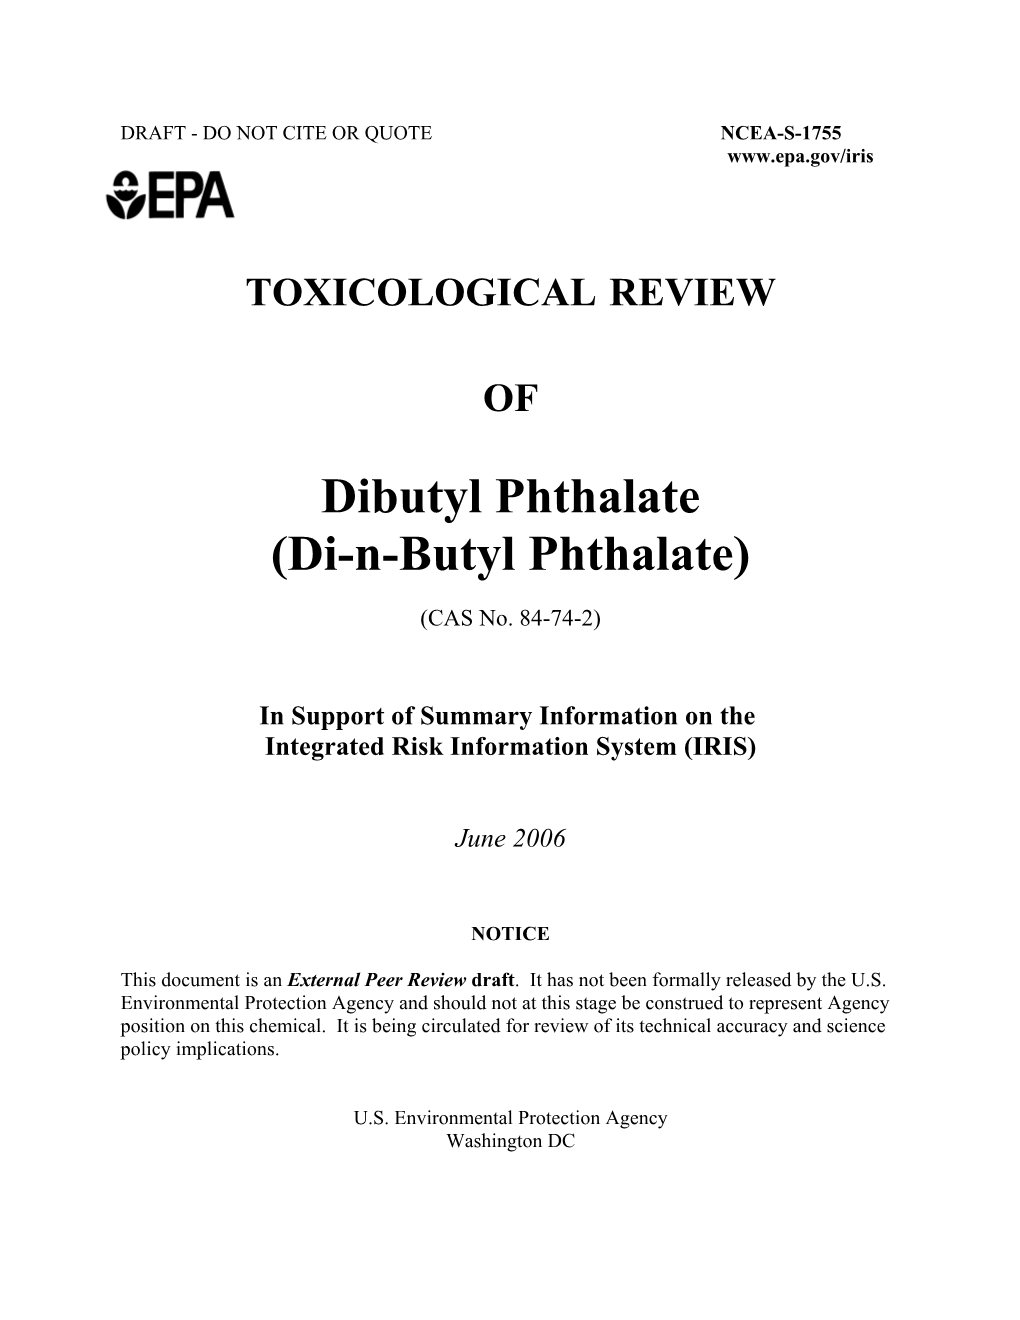 TOXICOLOGICAL REVIEW of Dibutyl Phthalate